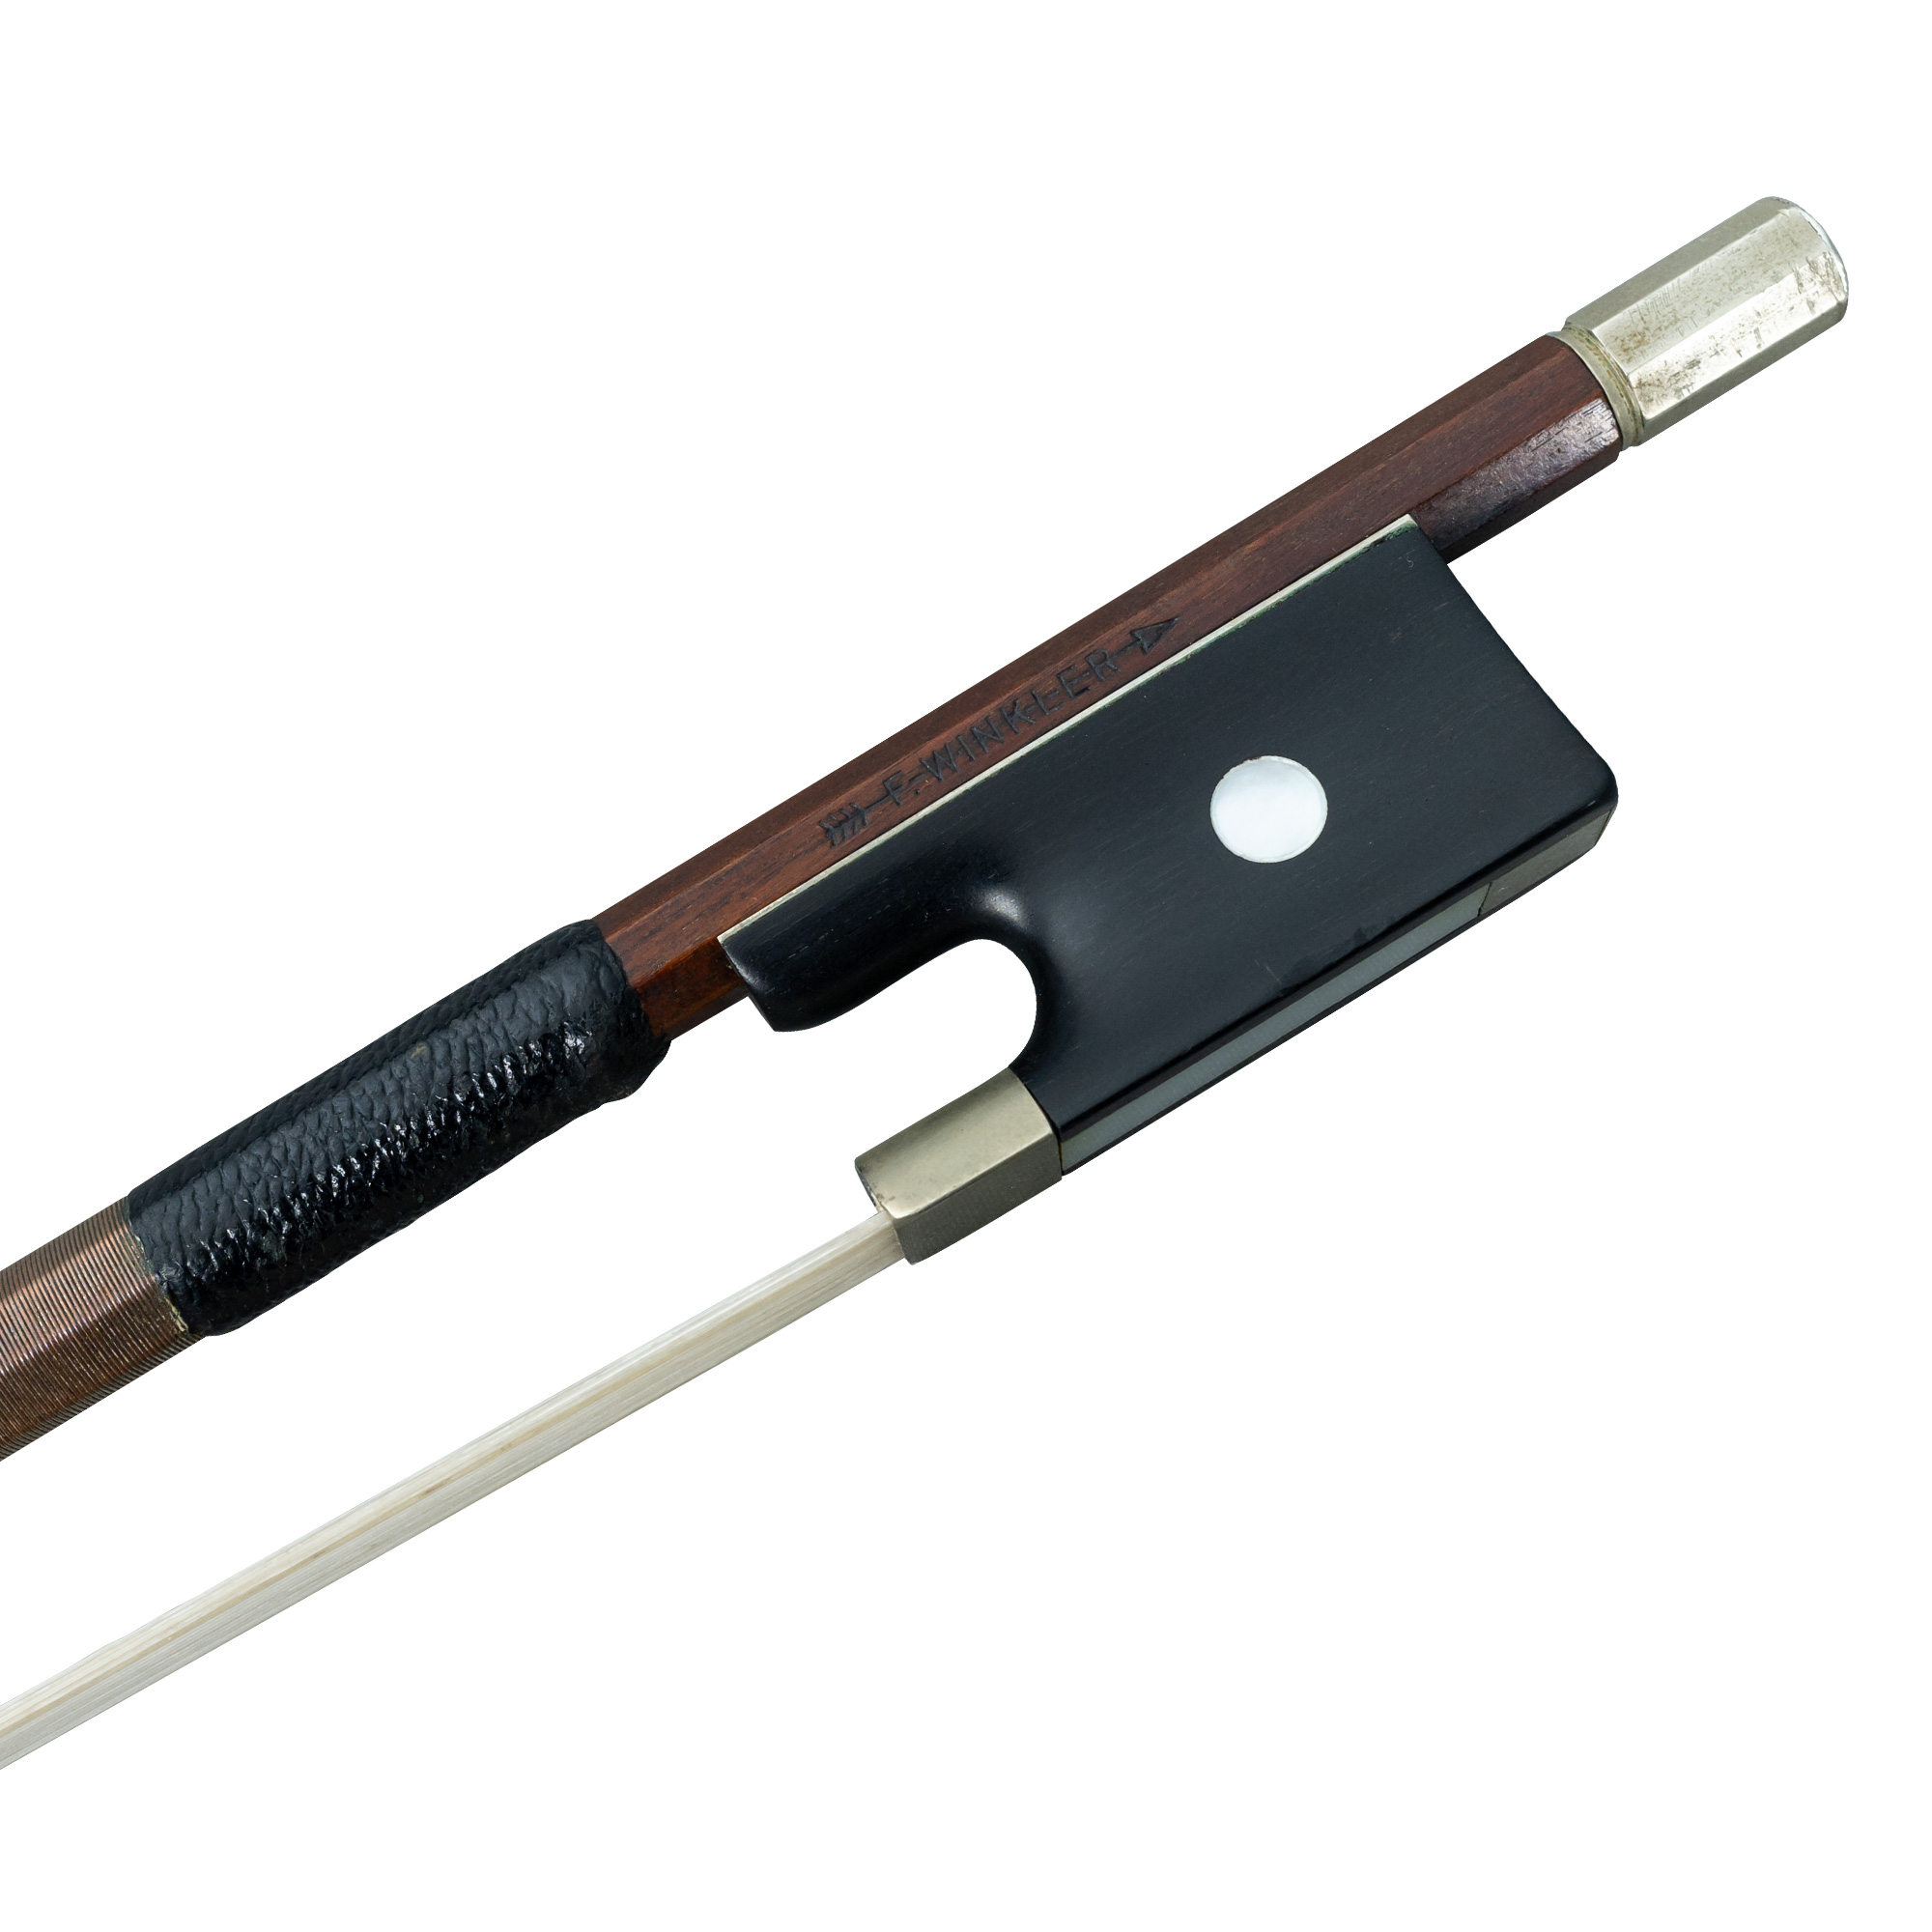 Franz Winkler Silver Mounted Violin Bow in action